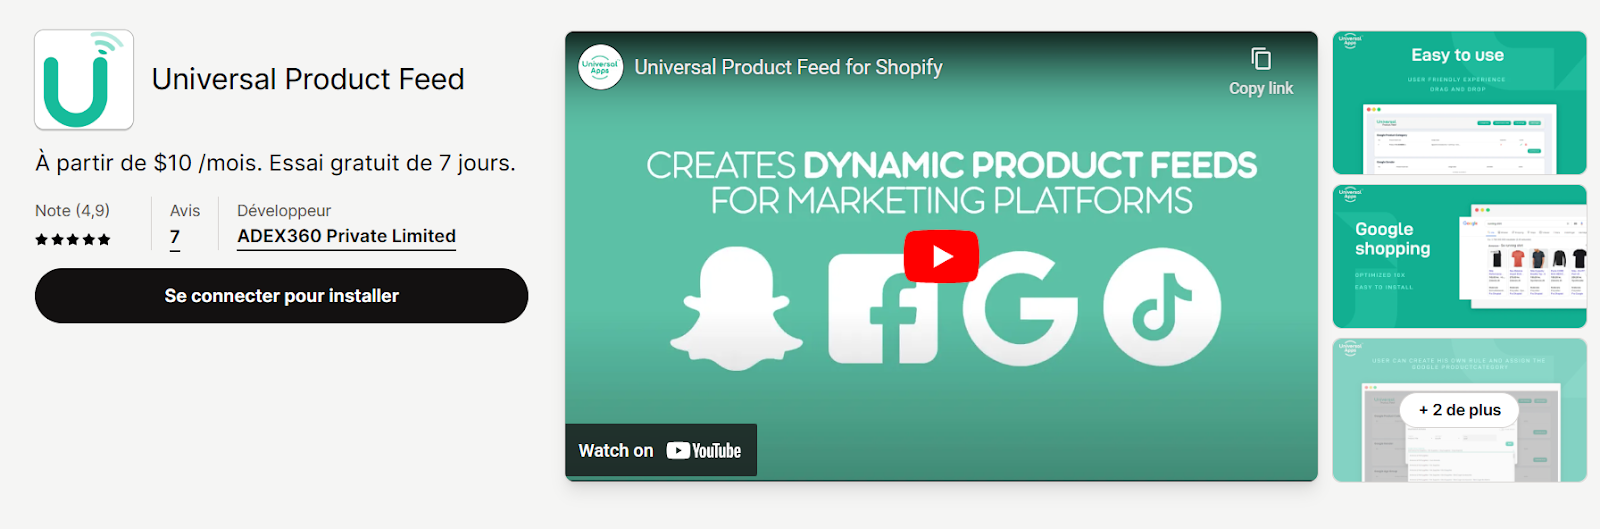 Universal Product Feed